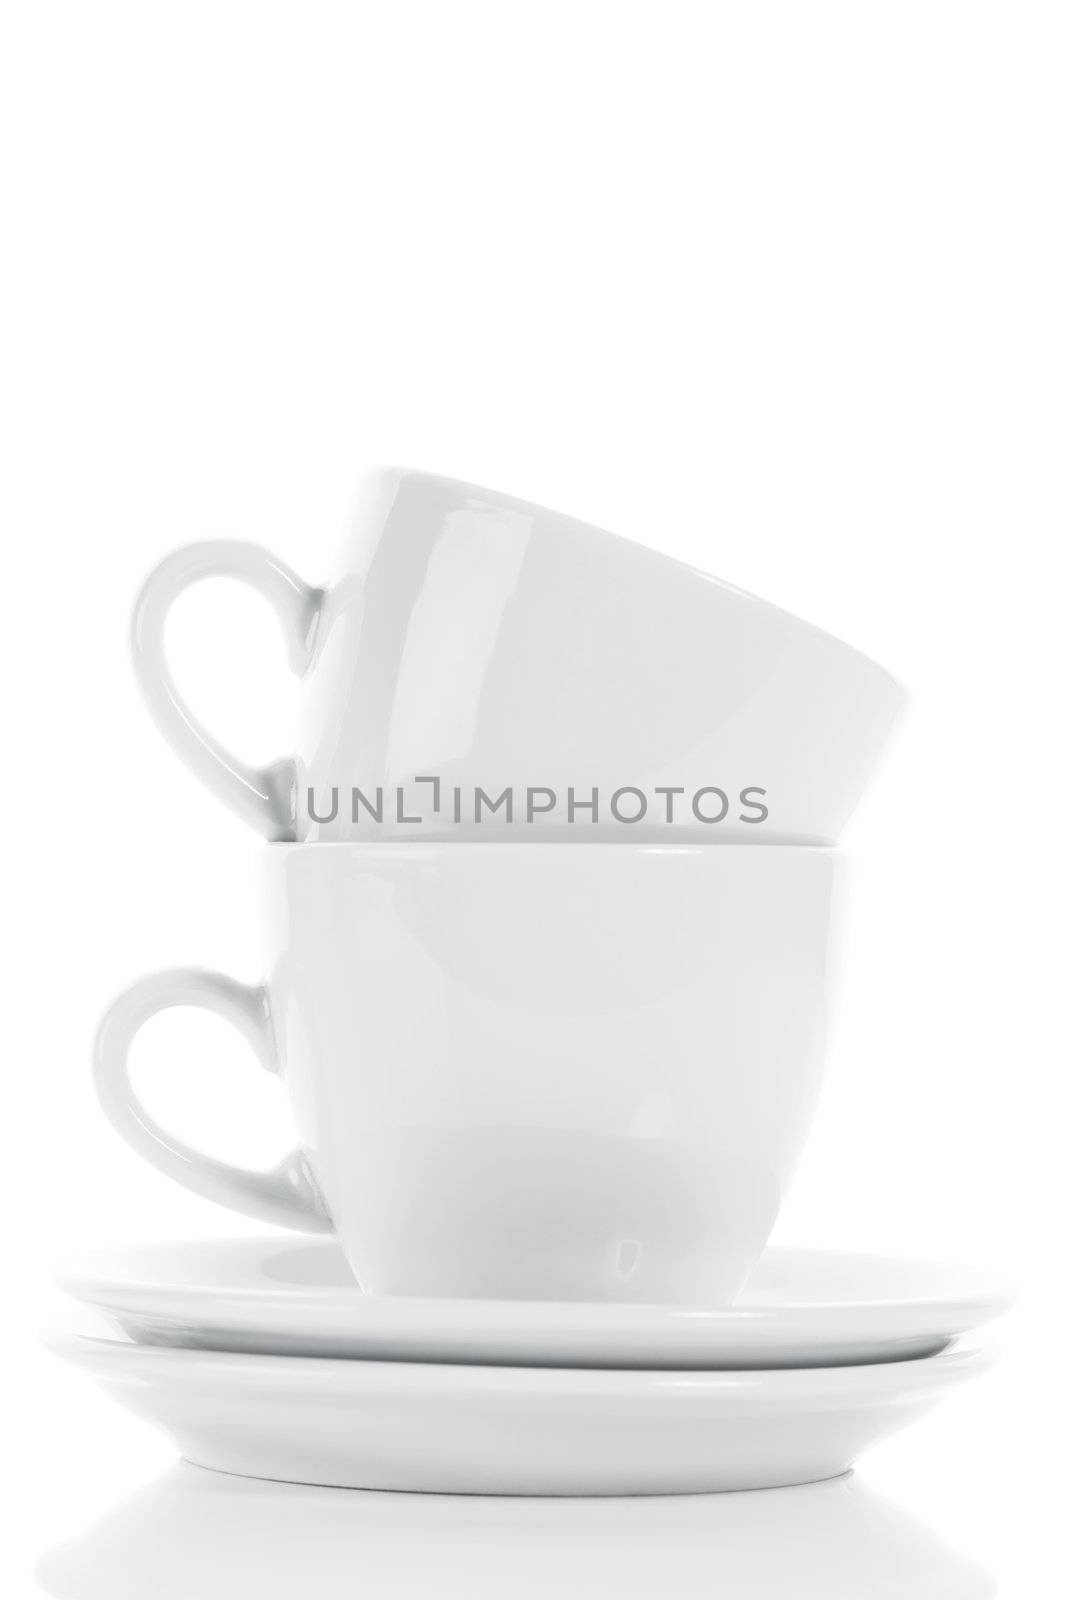 white stapled coffee cups by RobStark